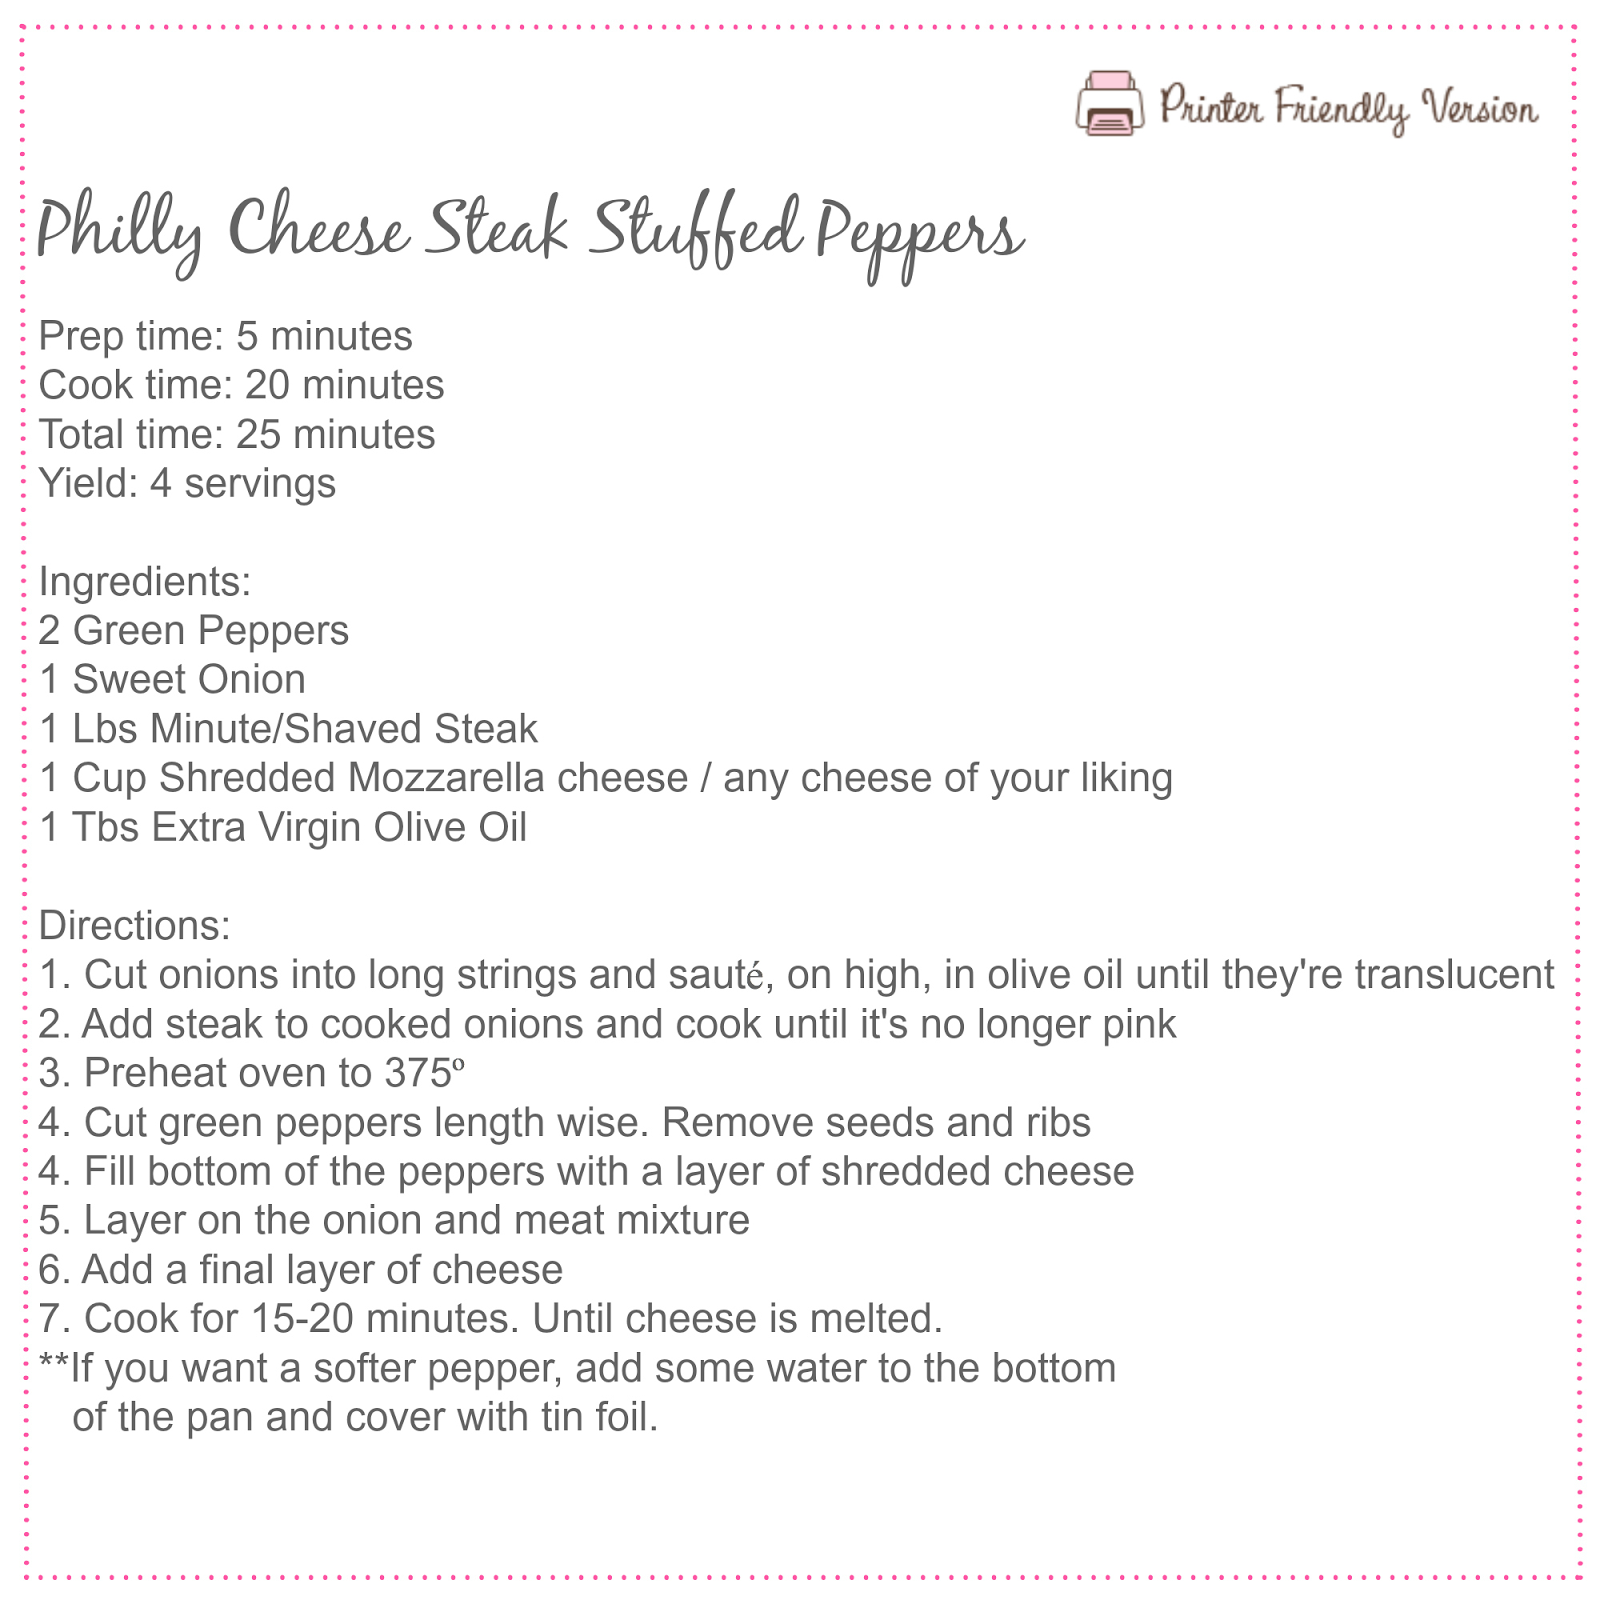 Simply Anchored: Philly Cheese Steak Stuffed Peppers